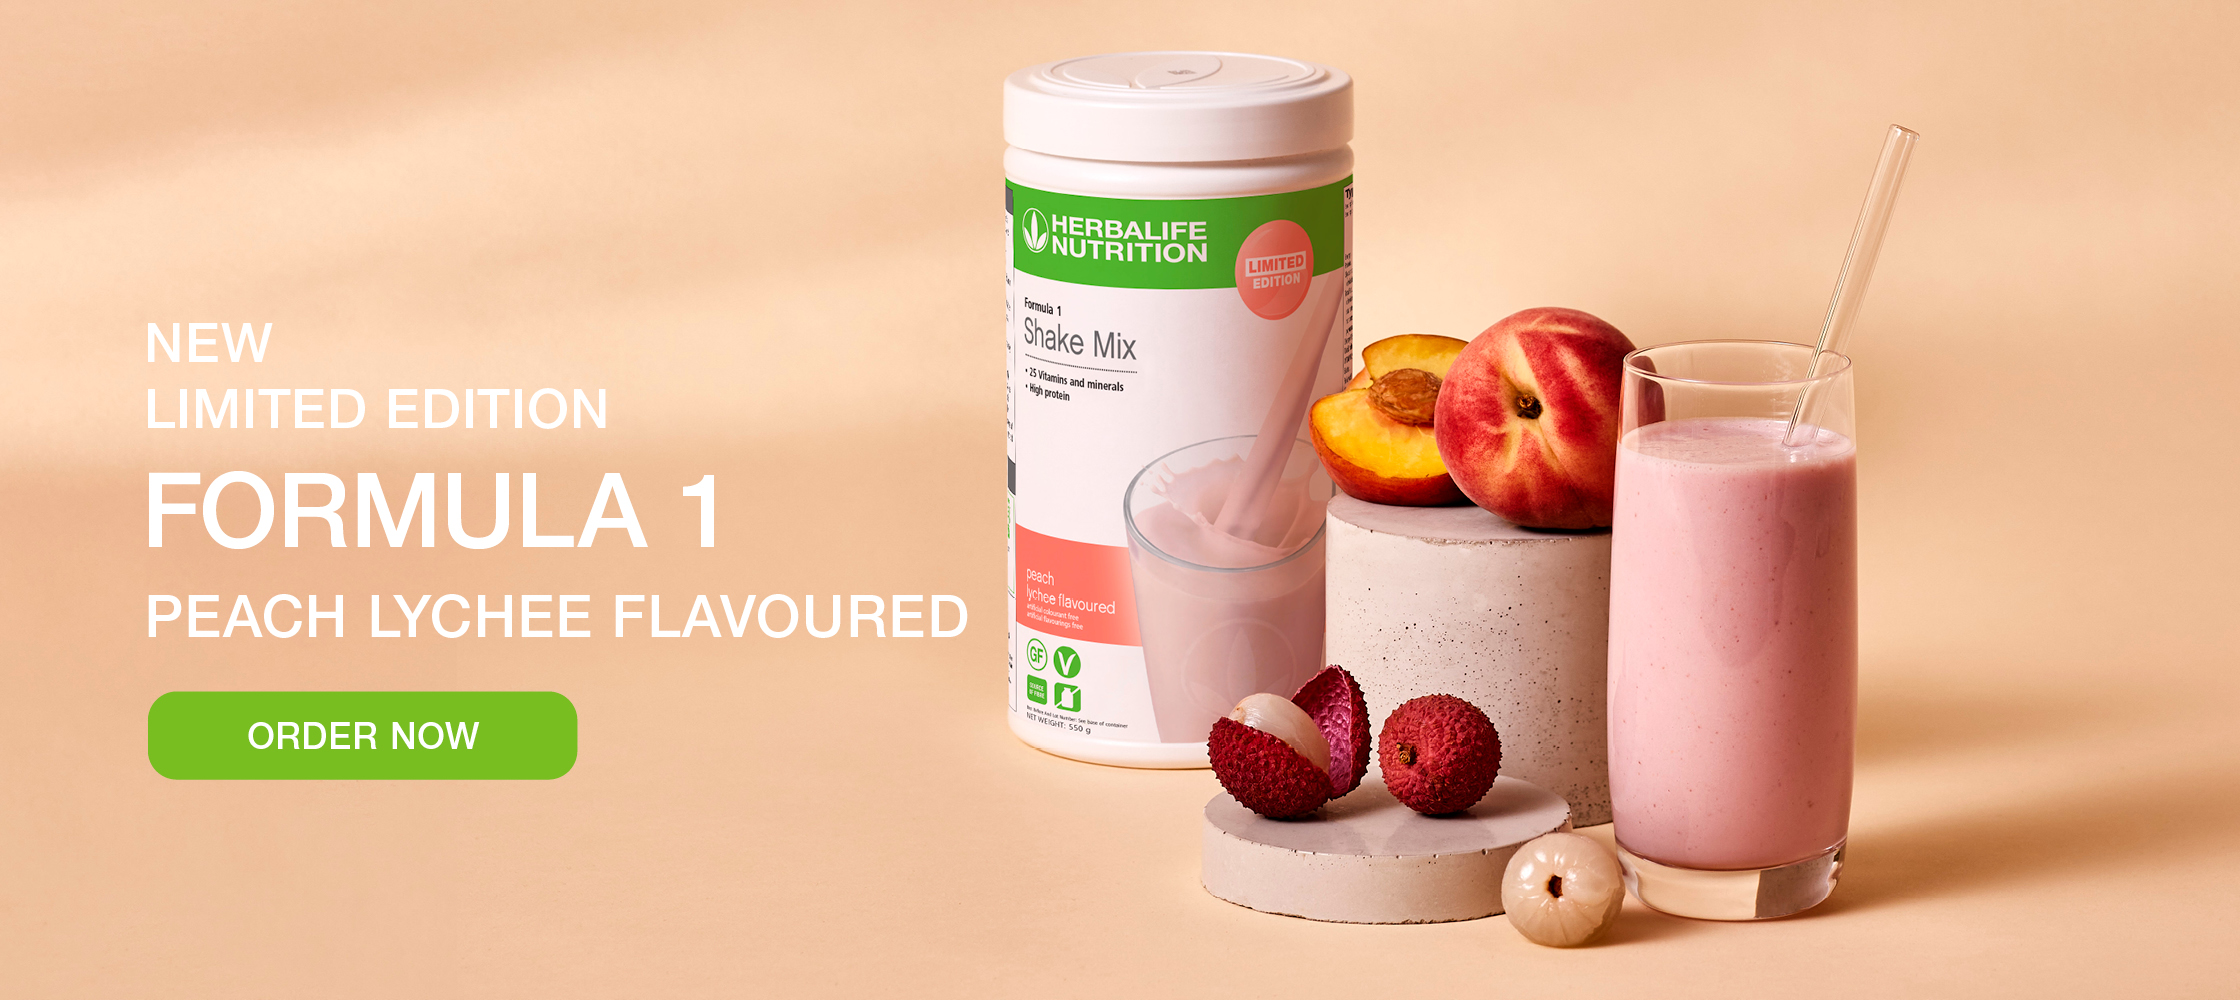 Formula 1 Shake Mix Limited Edition Peach Lychee Flavoured product shot